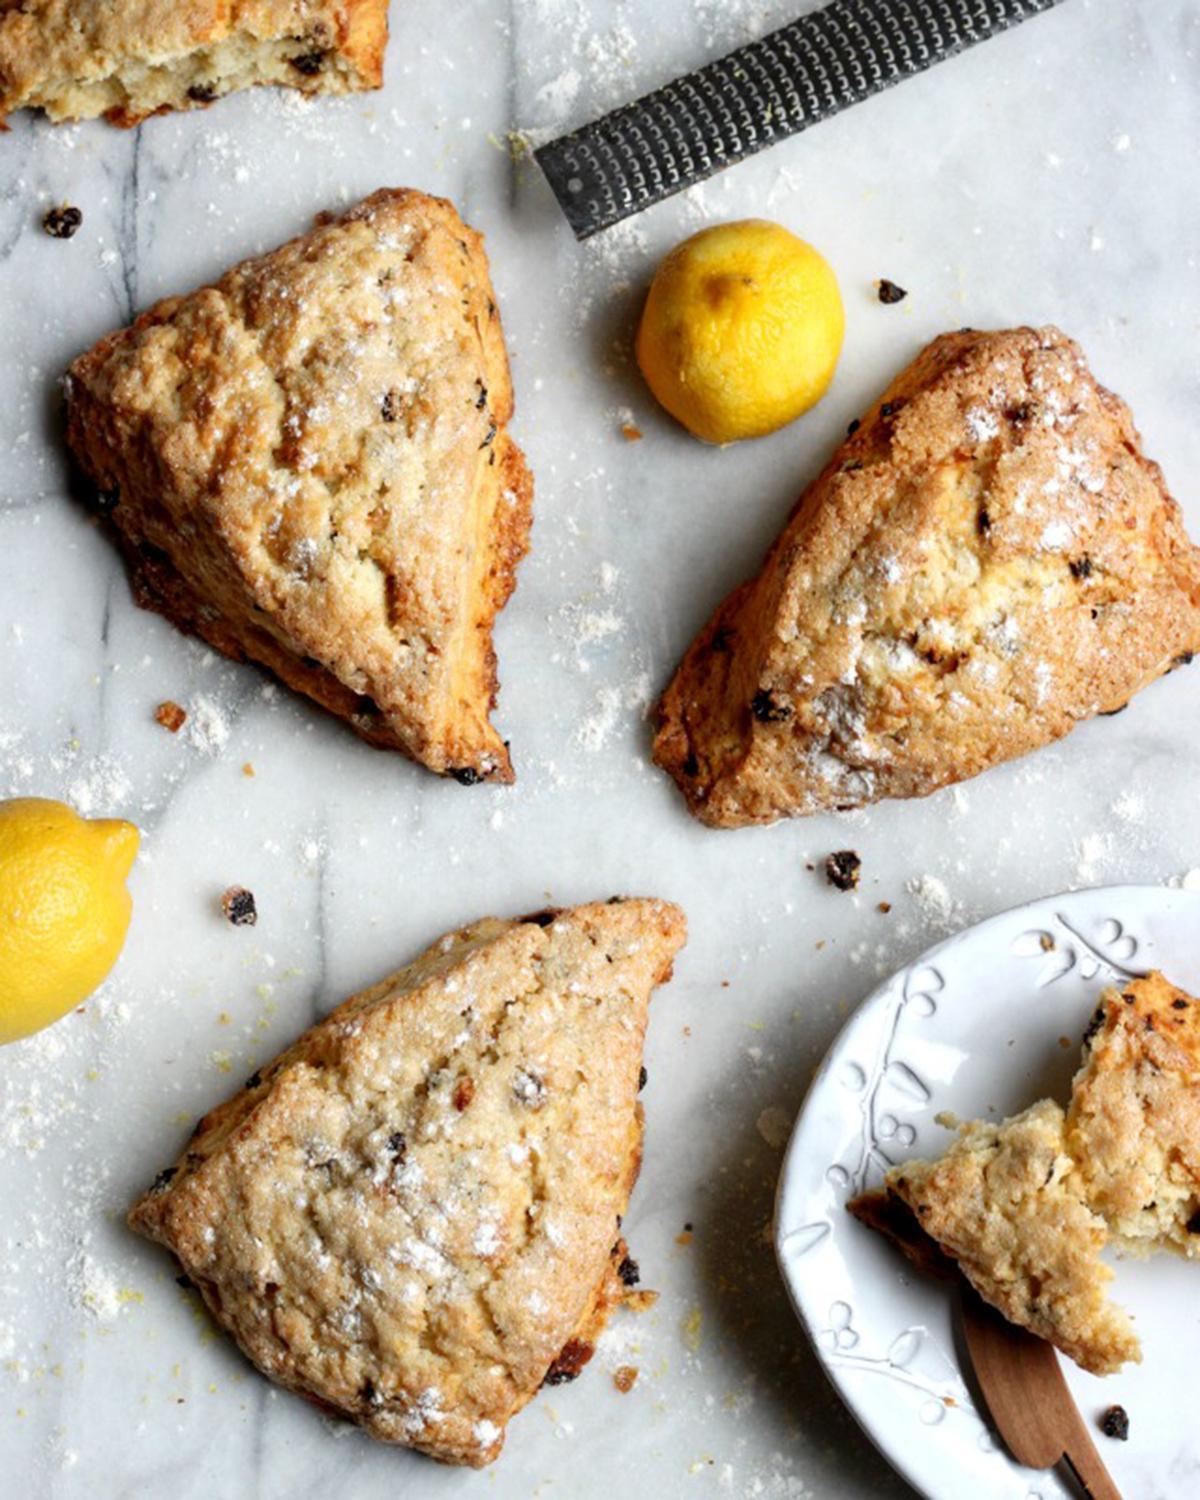 These dense, moist, and crumbly scones are a baking tradition worth repeating. (Lynda Balslev for Tastefood)